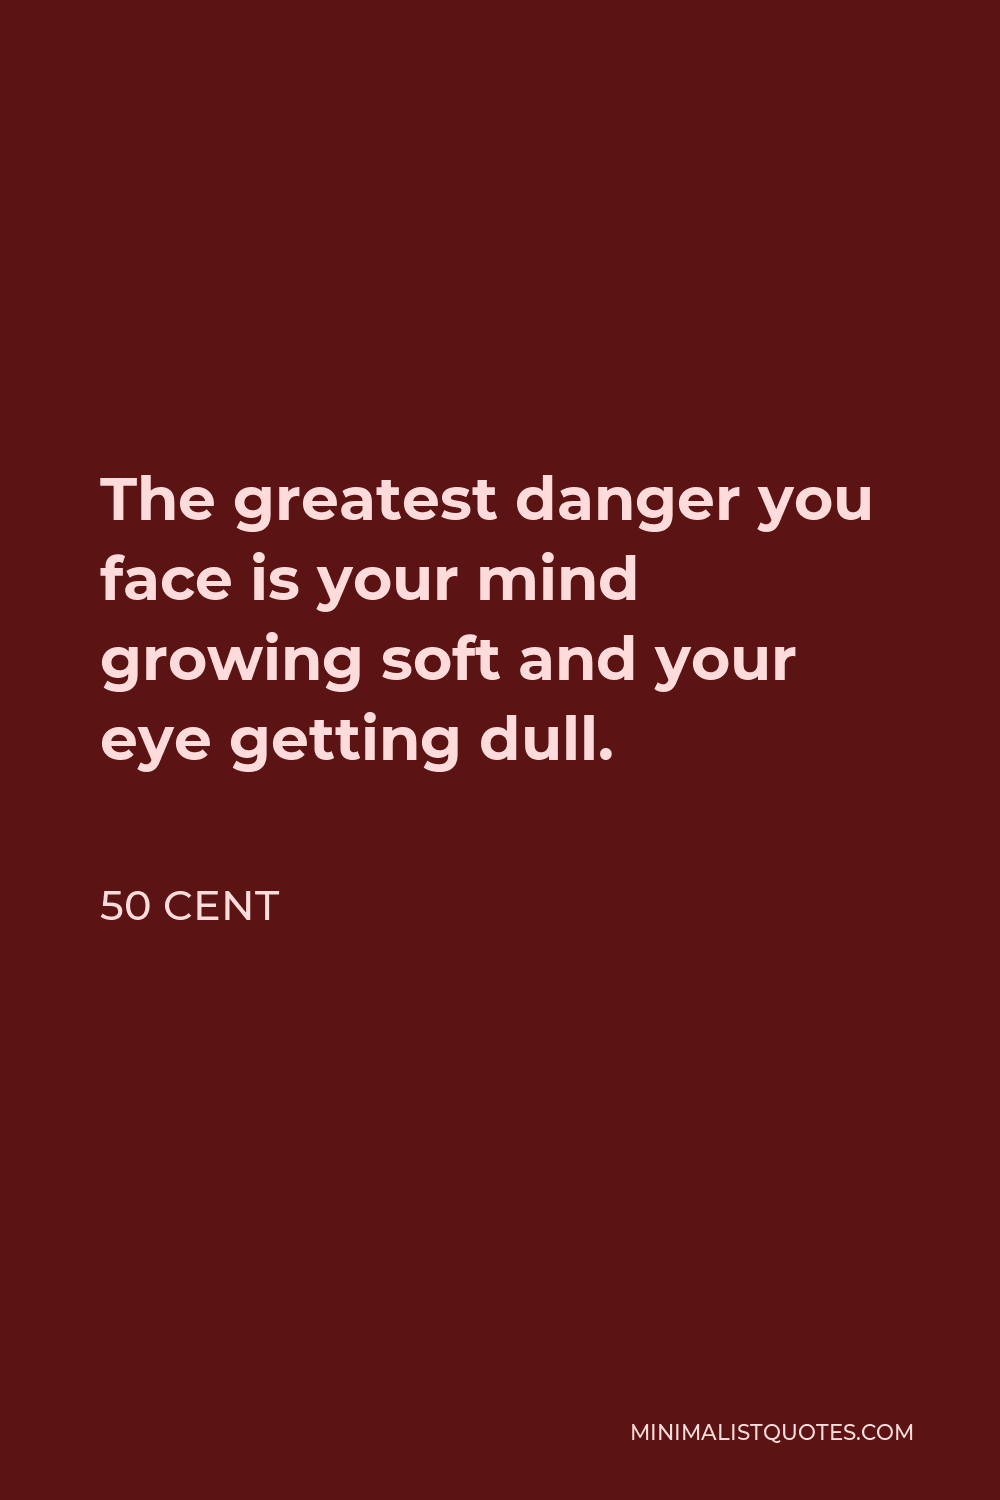 50 Cent Quote - The greatest danger you face is your mind growing soft and your eye getting dull.